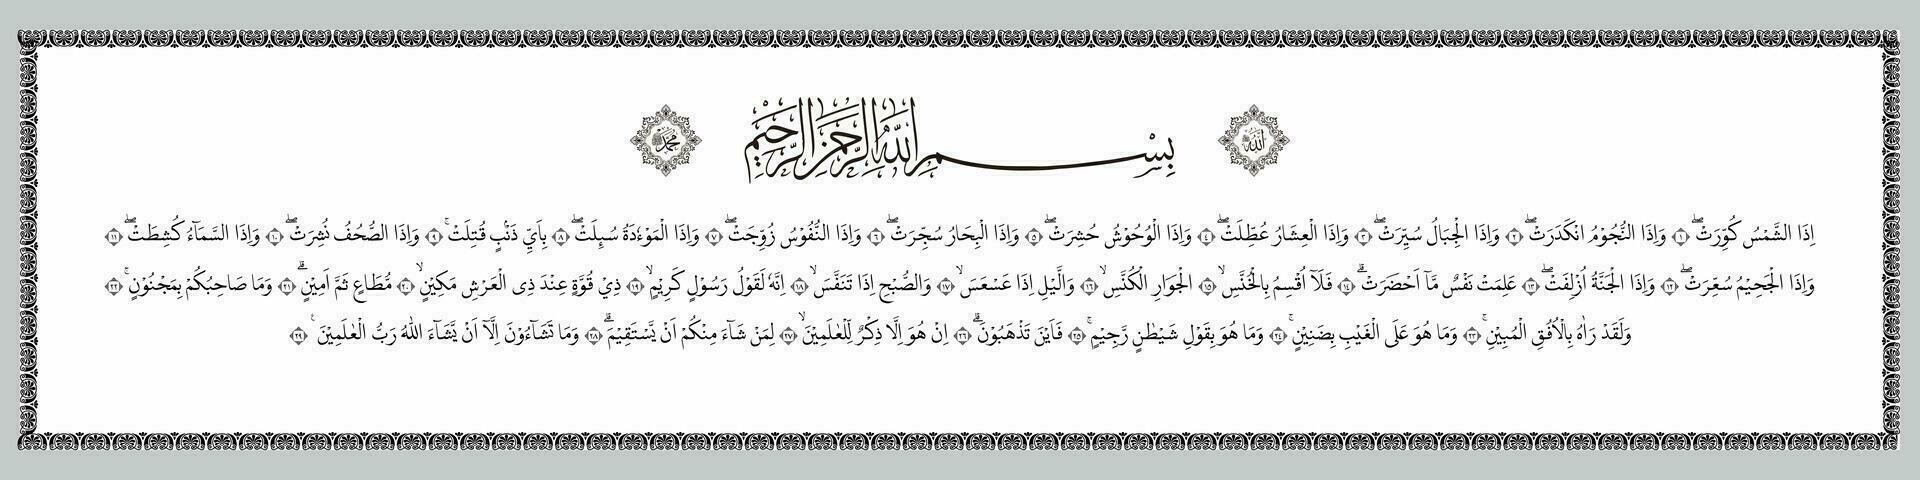 Arabic background Calligraphy of the Qur'an Surah Attakwir means that the Qur'an is truly the word of God brought by the noble messenger Jibril. vector